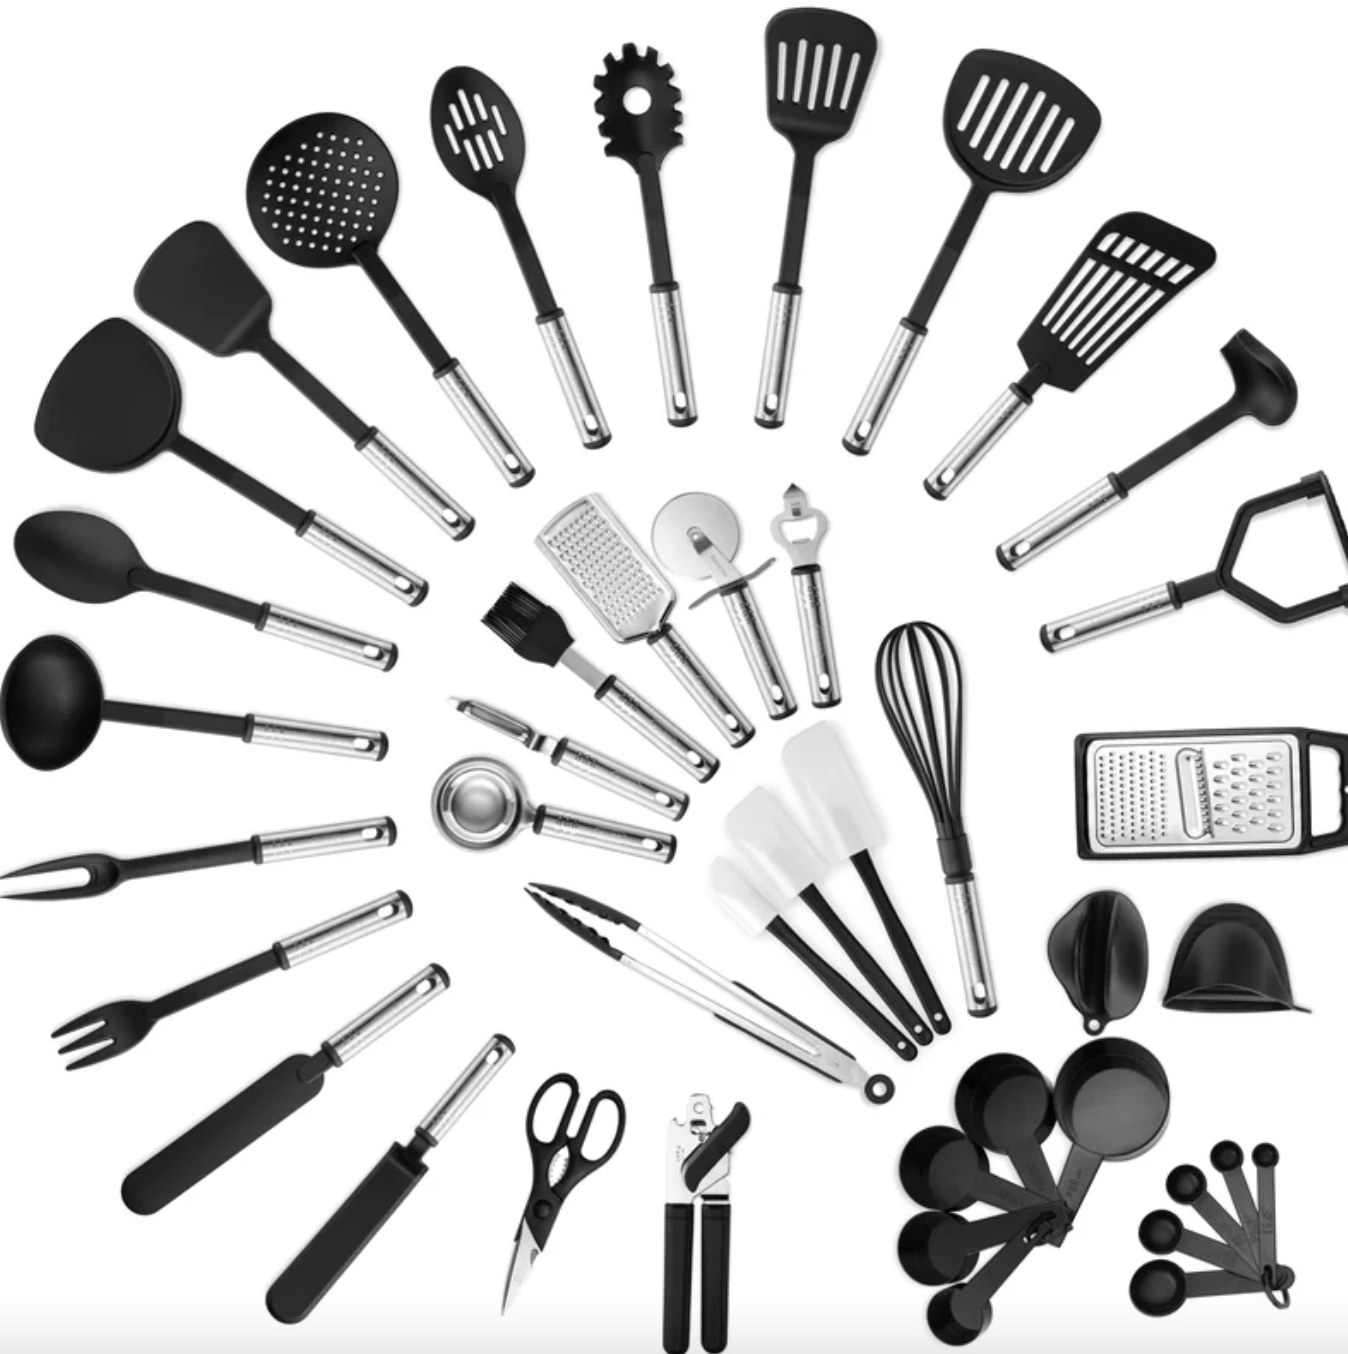 the large set of black and silver utensils